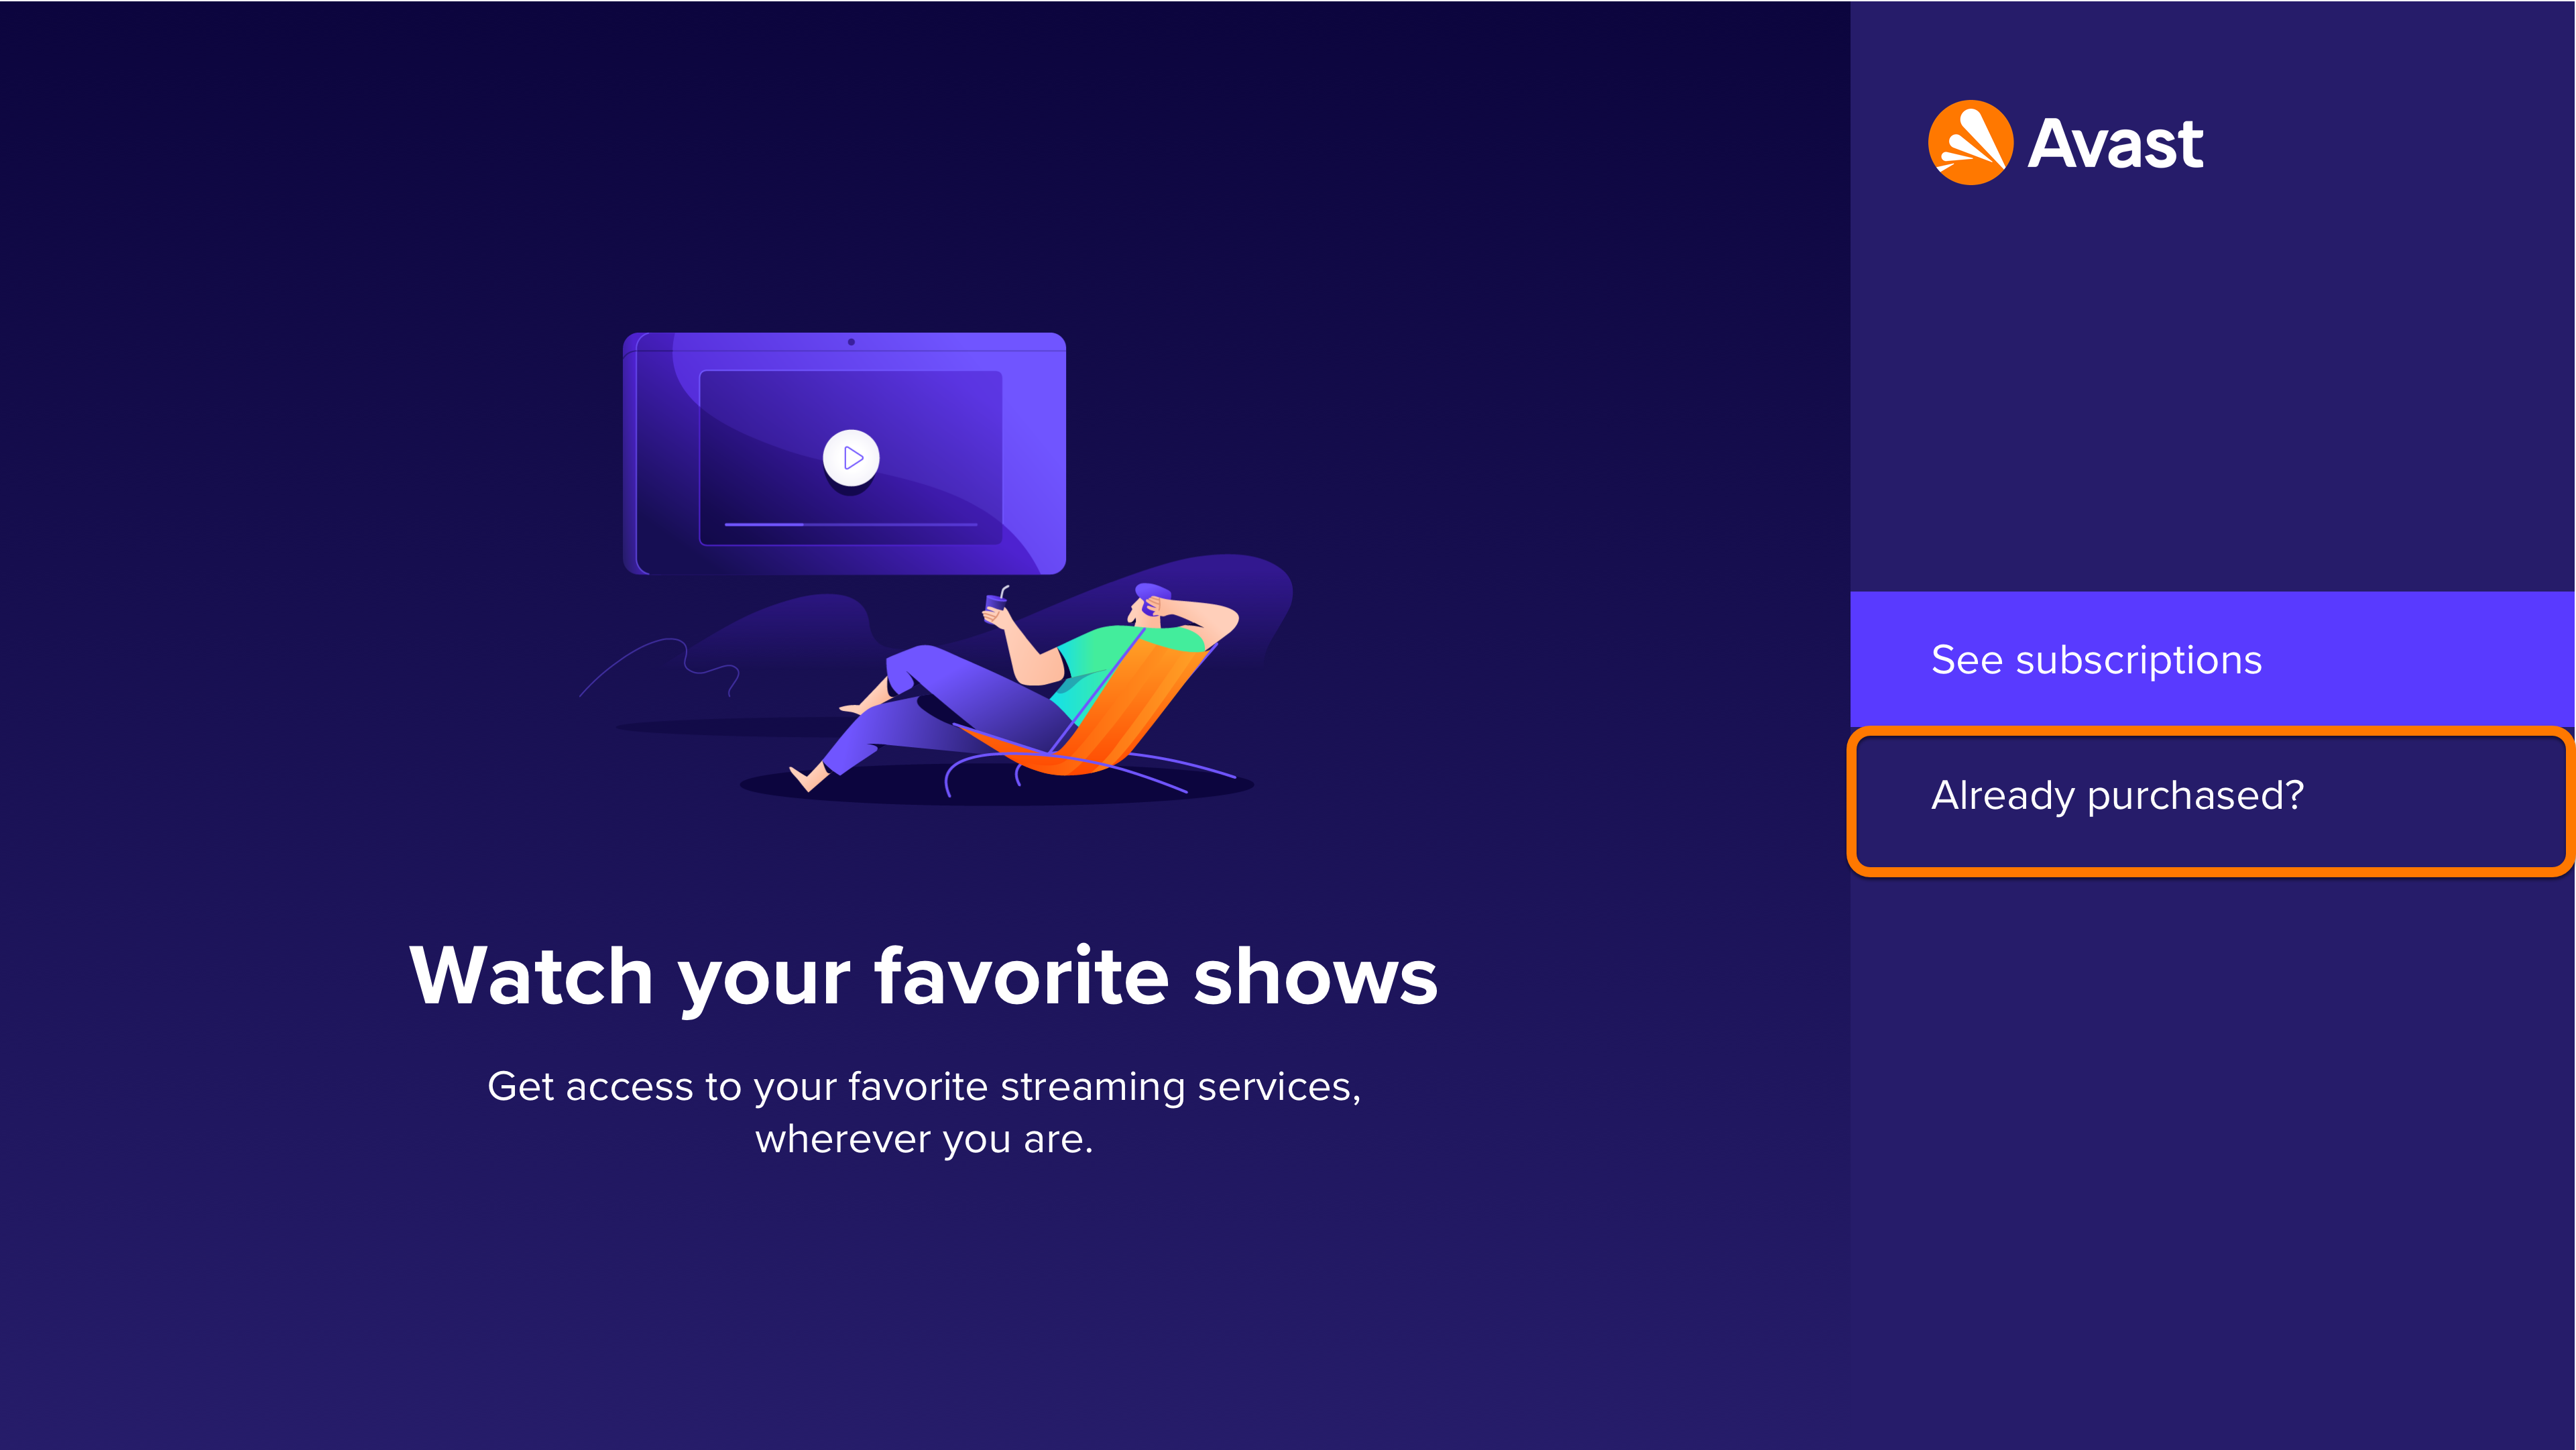 how to add device to avast account